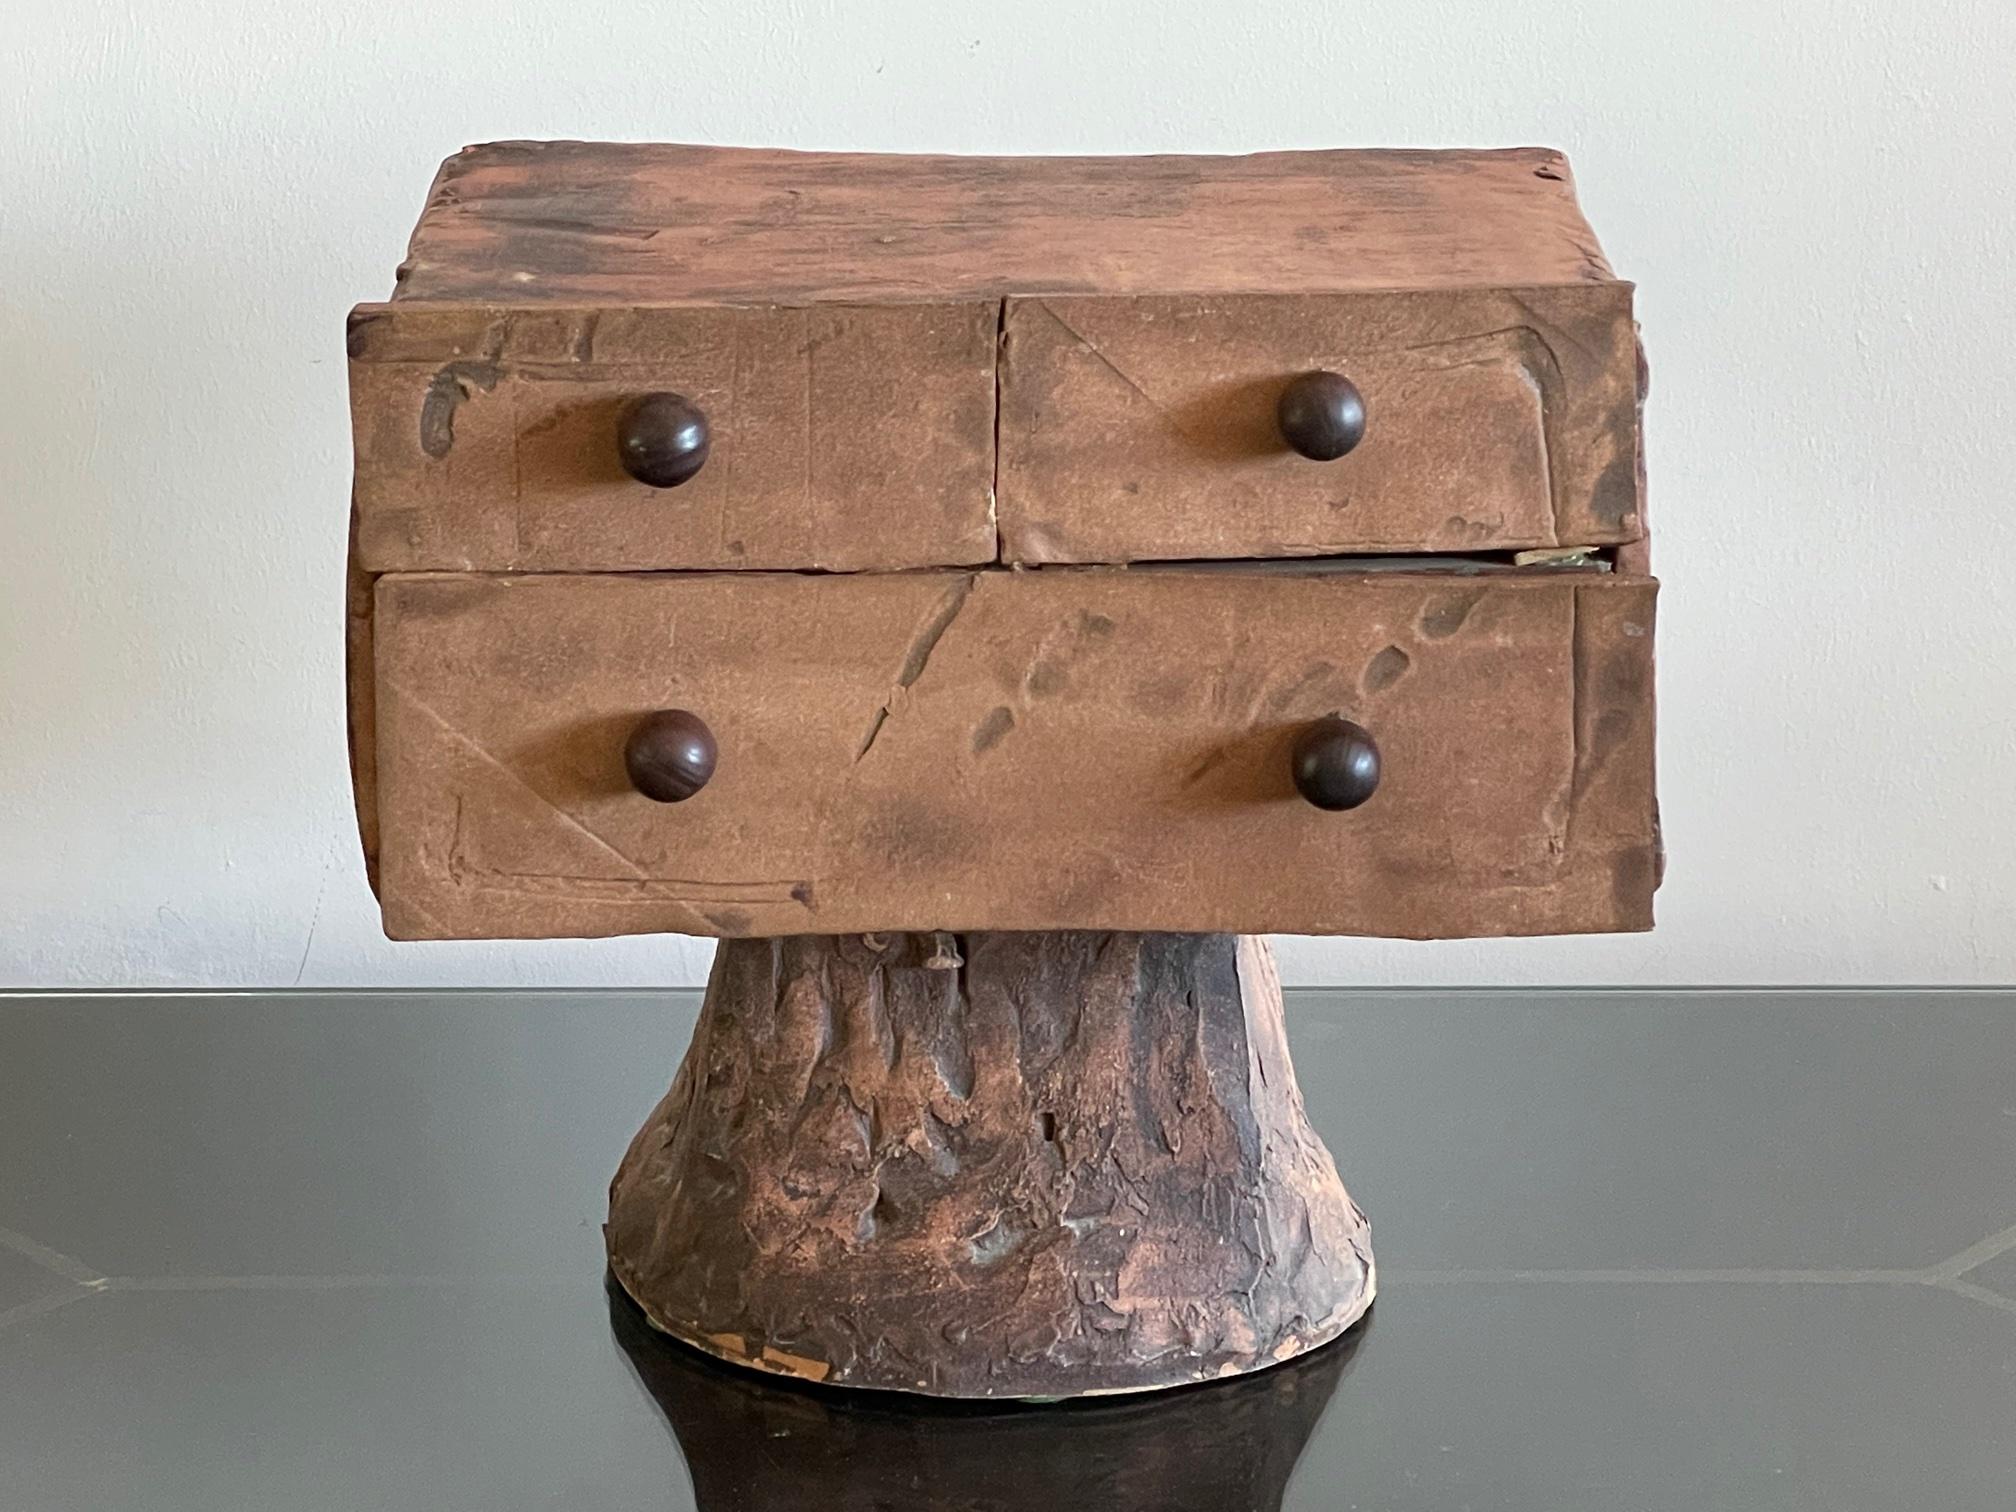 An unusual miniature chest of drawers by Virginia Podufaly, ca' 1970's. She was one of the founders of the Potters' Guild in Annapolis, Maryland in 1972.